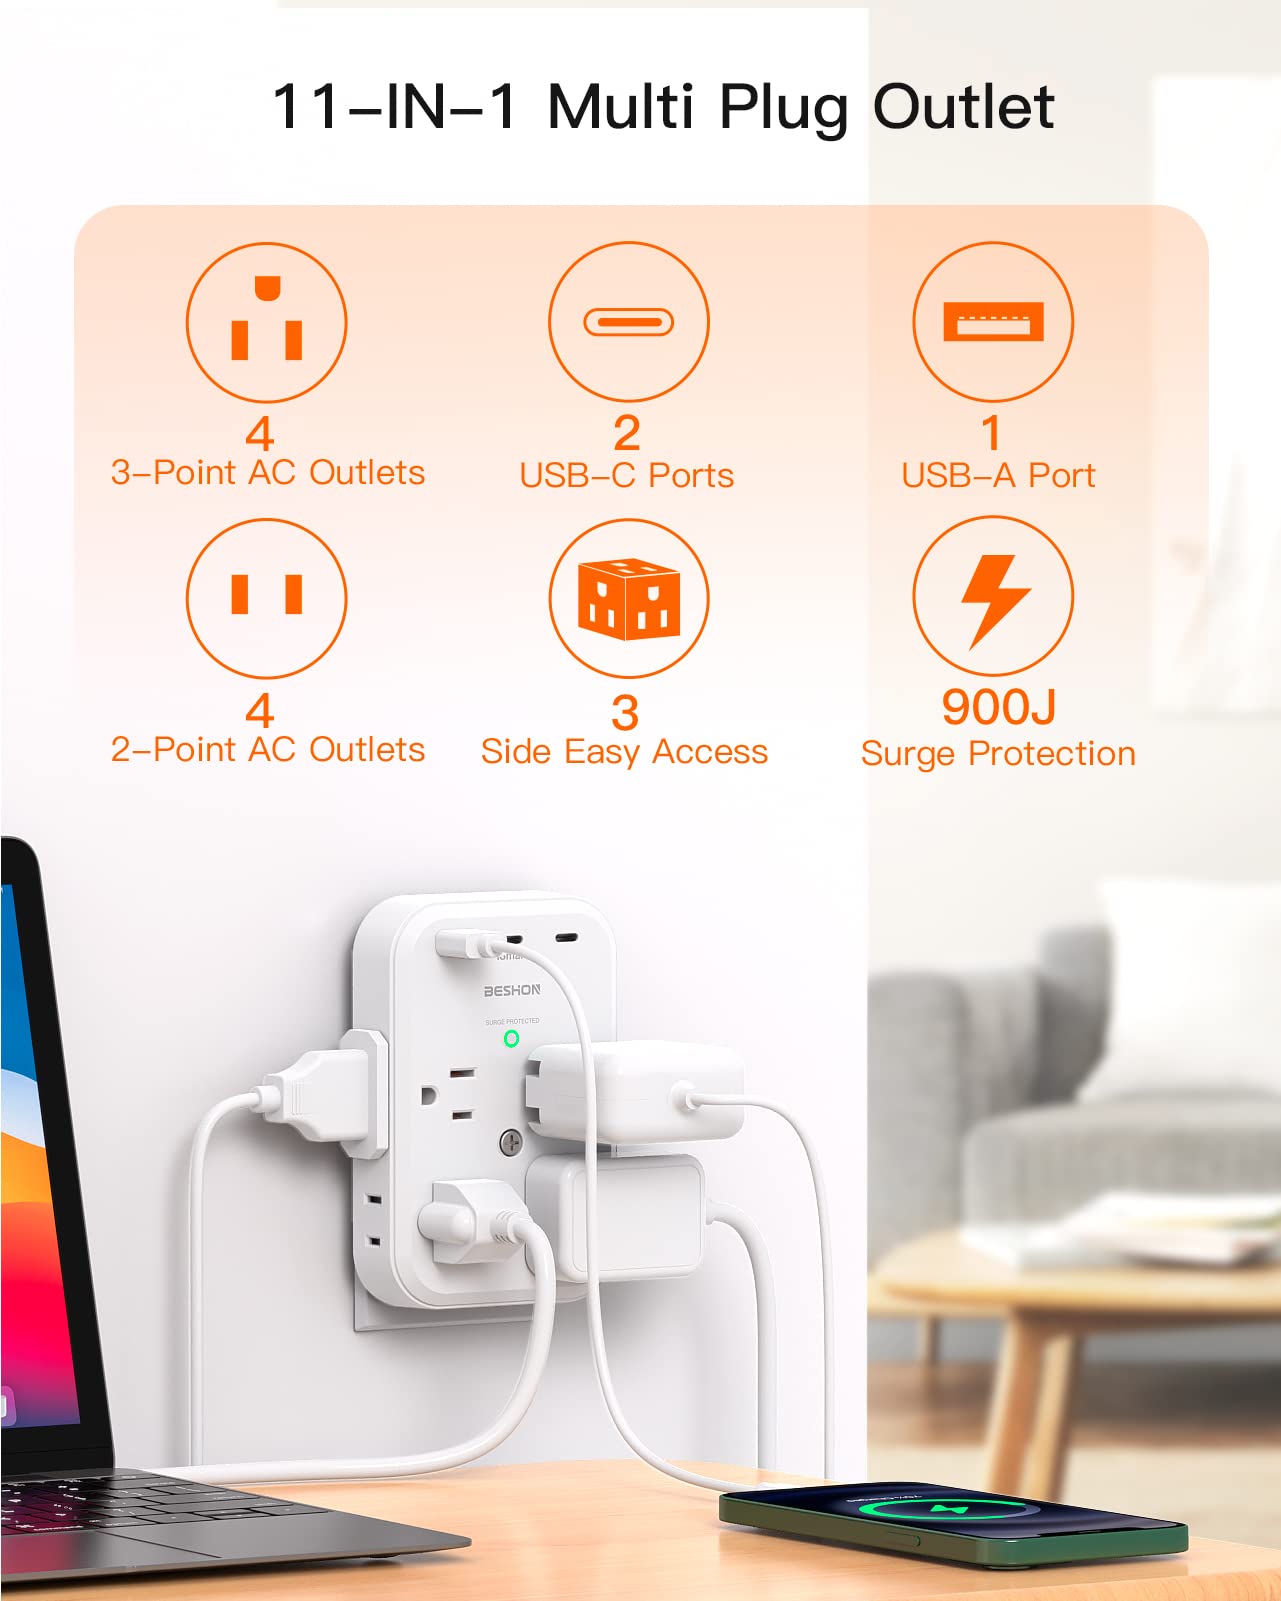 BESHON 8 Outlet + 3 USB (2 USB-C) Outlet Extender / Surge Protector $9 at Amazon